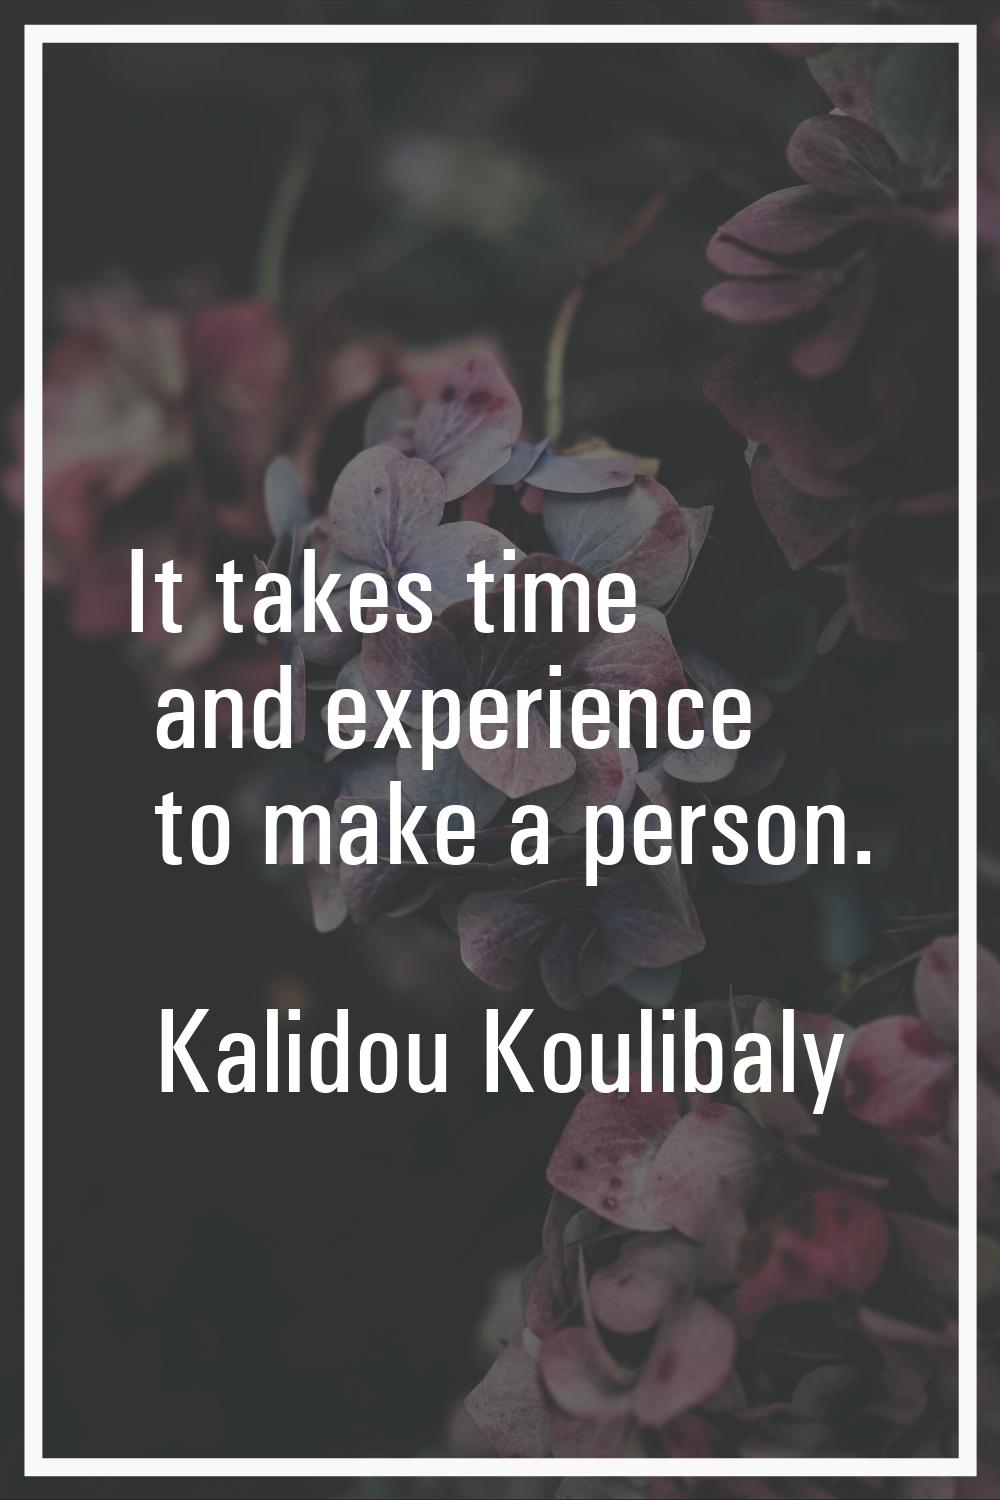 It takes time and experience to make a person.